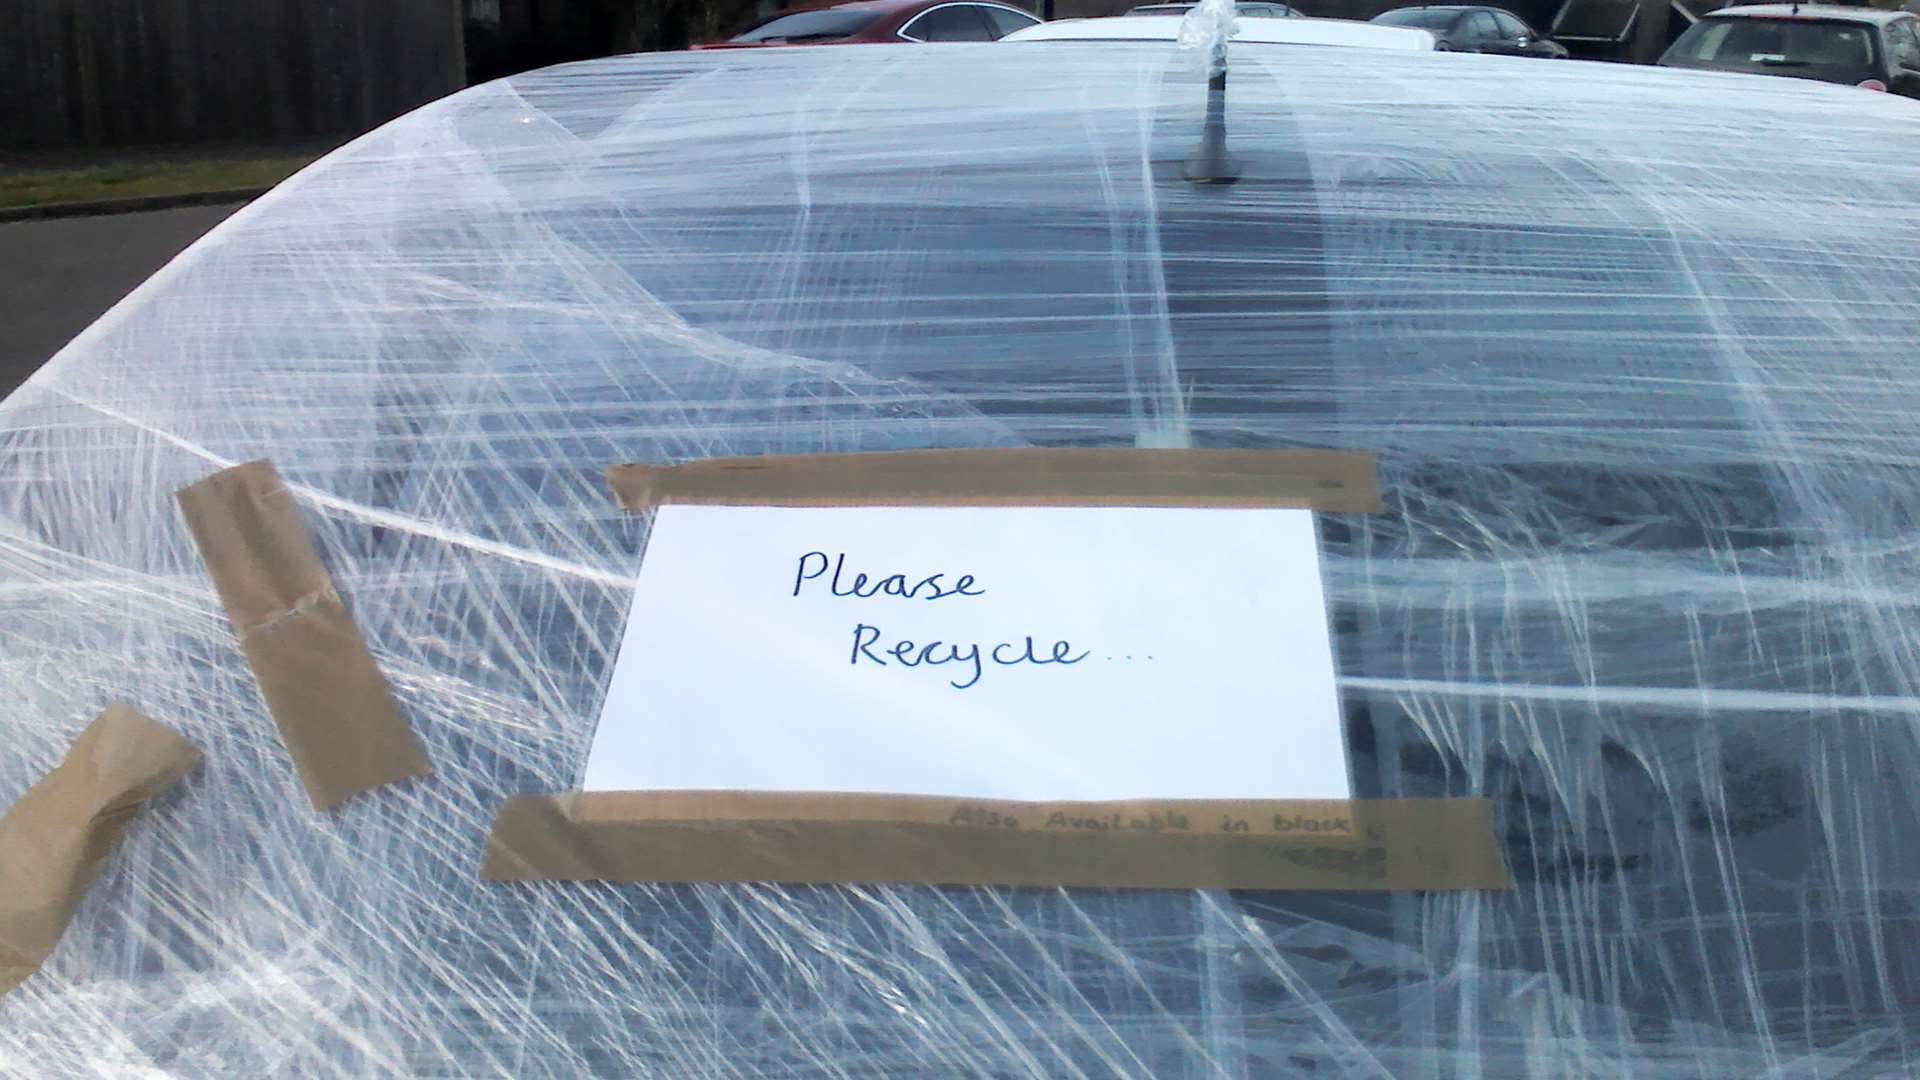 Clingfilm is not actually recyclable